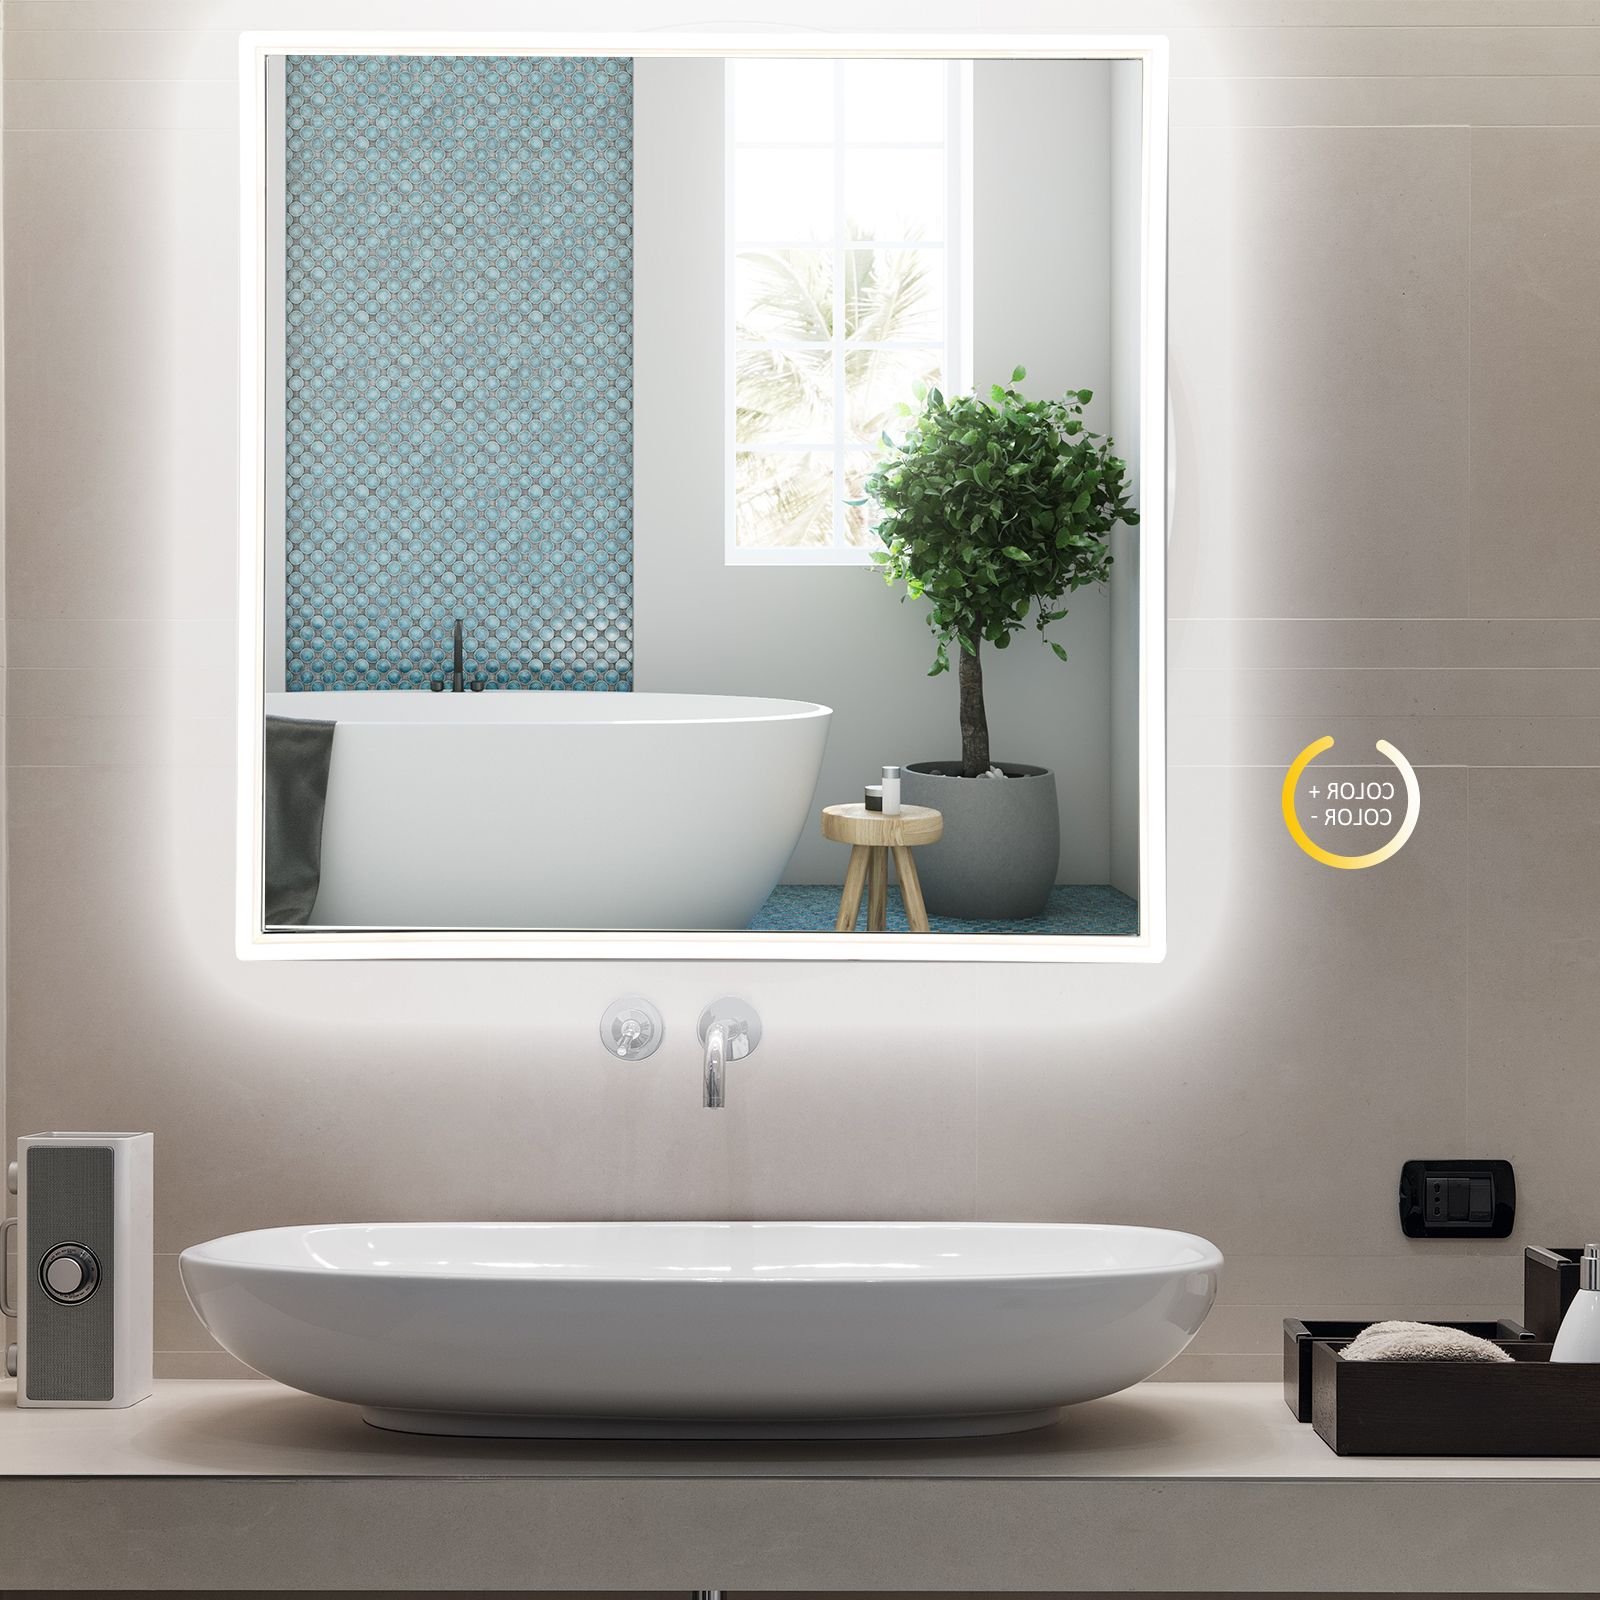 Lighted Bathroom Wall Mirrors Intended For Most Recent Details About 24" Led Lighted Bathroom Wall Mirror 3 Colors Aluminum Glass  Makeup Touch Button (View 13 of 20)